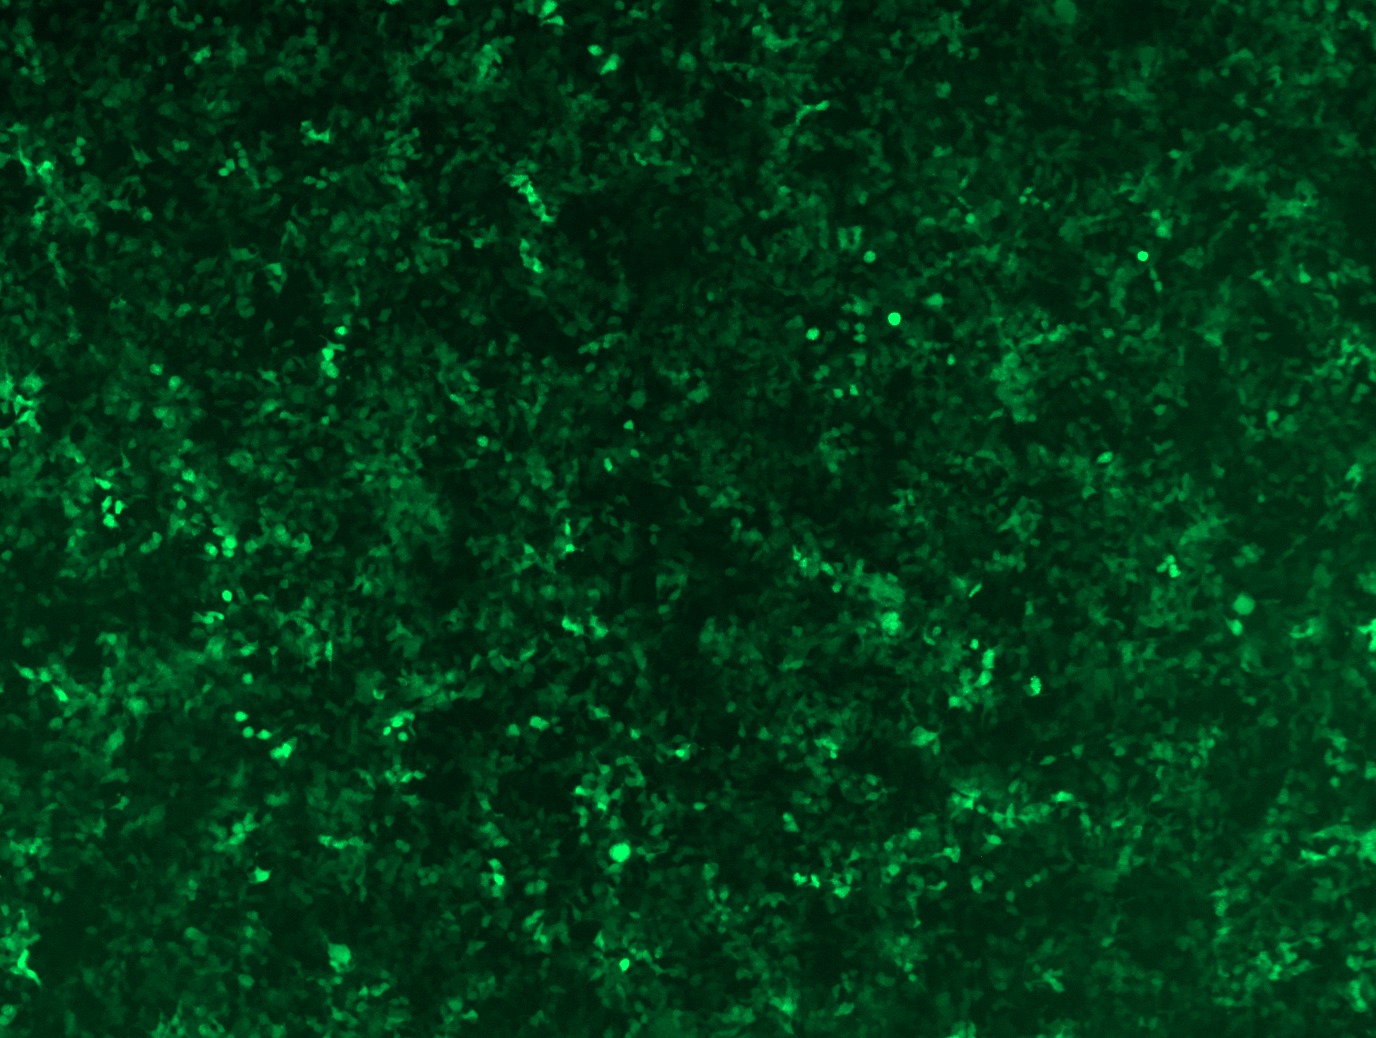 GFP signal was observed under microscope at 48 hours after transduction of TL307748A virus into HEK293 cells. TL307748A virus was prepared using lenti-shRNA TL307748A and TR30037 packaging kit.